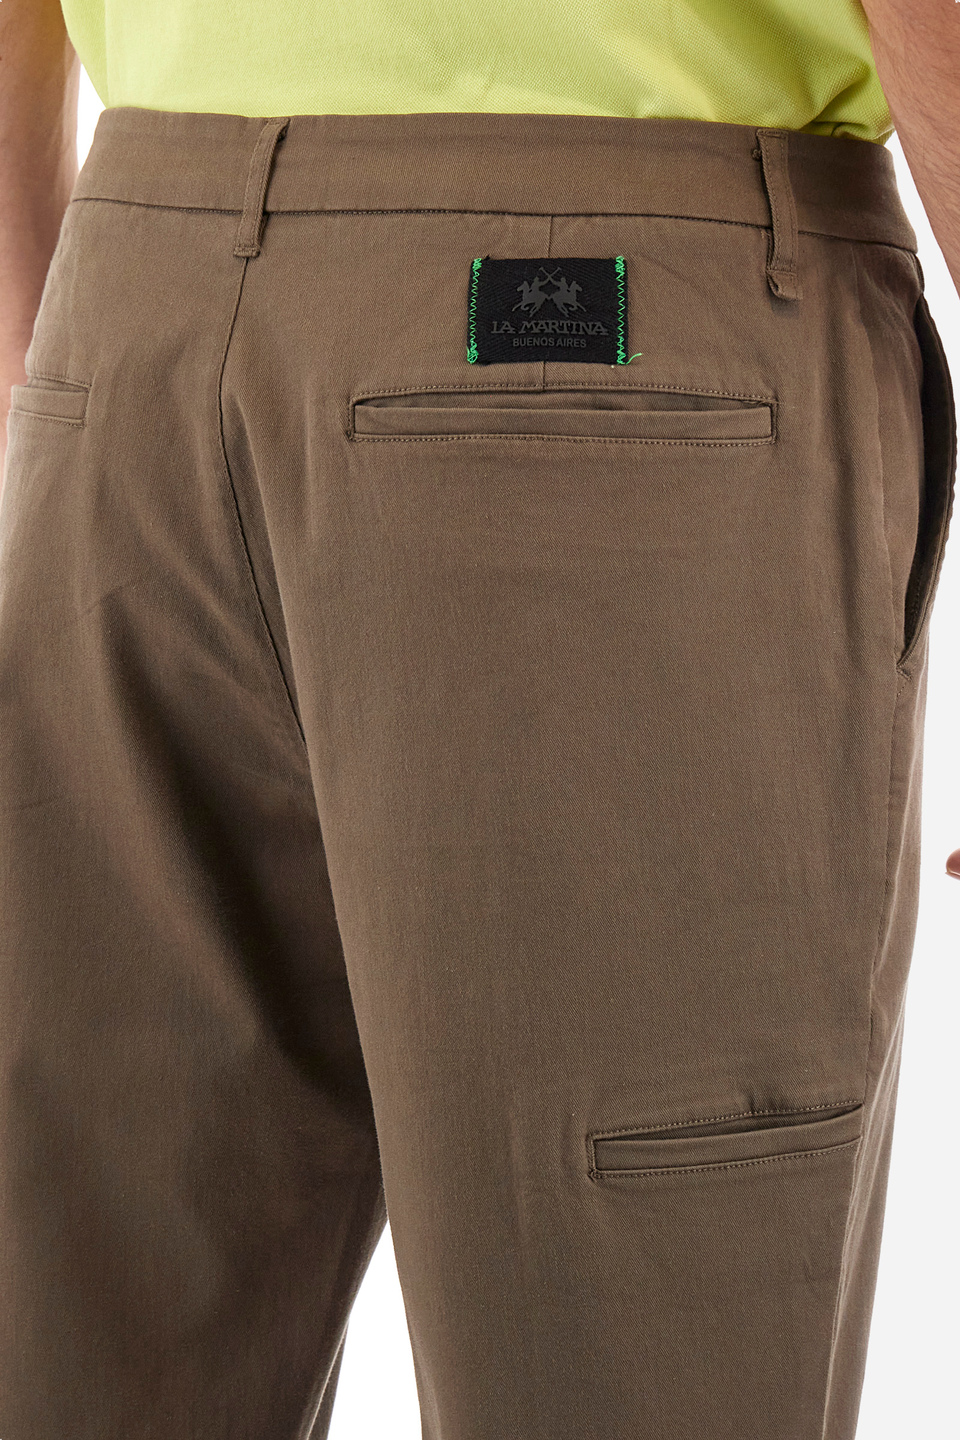 Men's chinos with a regular fit - Yirmeyahu | La Martina - Official Online Shop